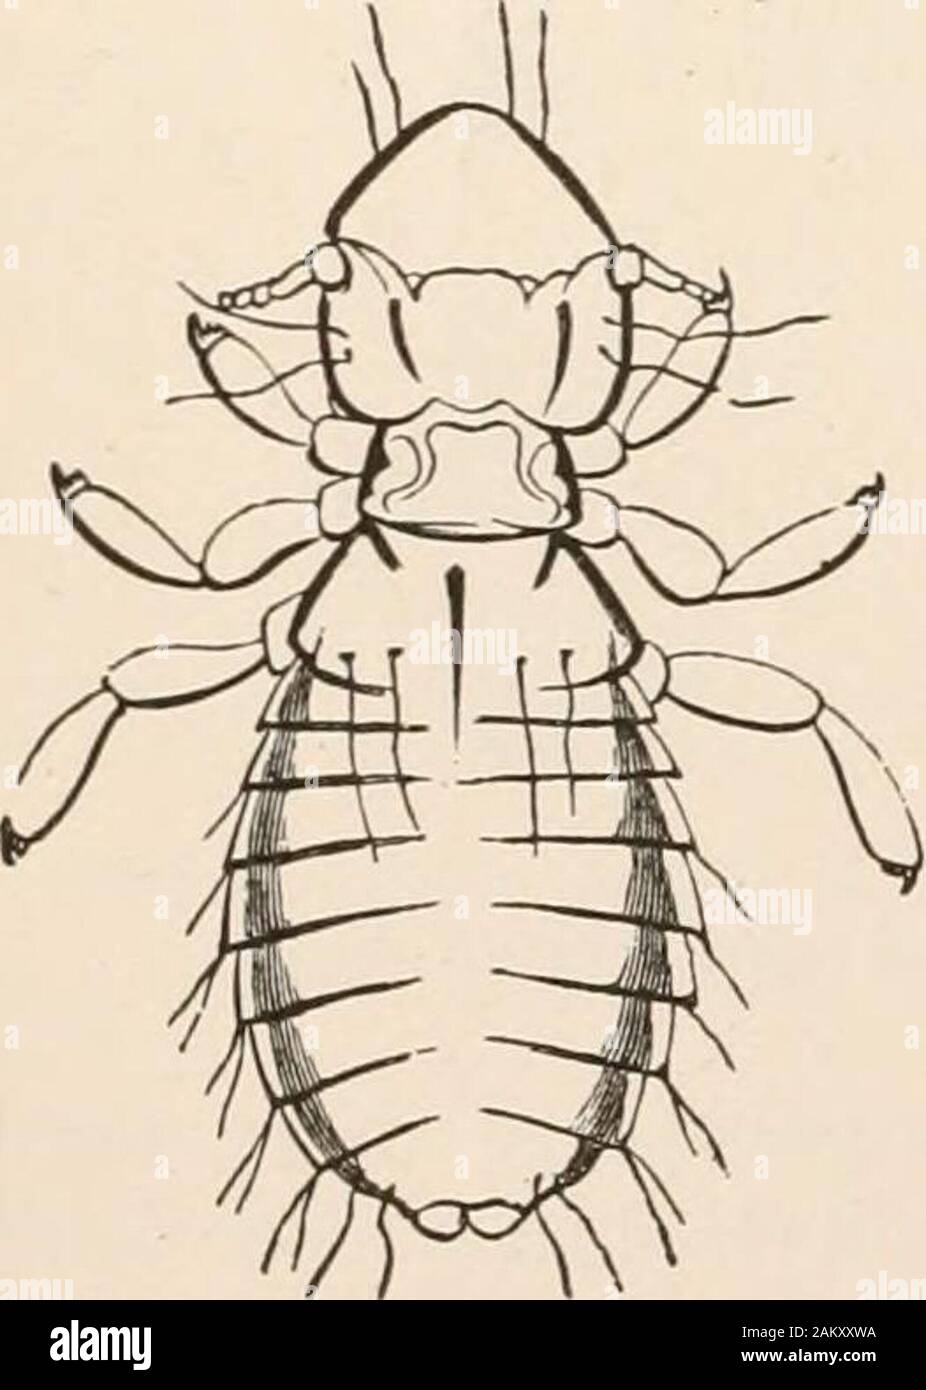 Entomology for beginners; for the use of young folks, fruitgrowers, farmers, and gardeners; . th of a normal winged male and female, replace them inthe colony. A male or king was found by Muller livingwith thirty-one complemental females. Suit-order 1. Mallophaga.—The bird-lice live usually as parasites under the feathers ofbirds, eating the feathers; but thespecies of two genera (Tricho-dectes and Gyropus) live on mam-mals, eating the young hairs, andsometimes clots of blood. Theydiffer from lice in having jawsadapted for biting. They can bemounted in balsam as transparentobjects for the micr Stock Photo